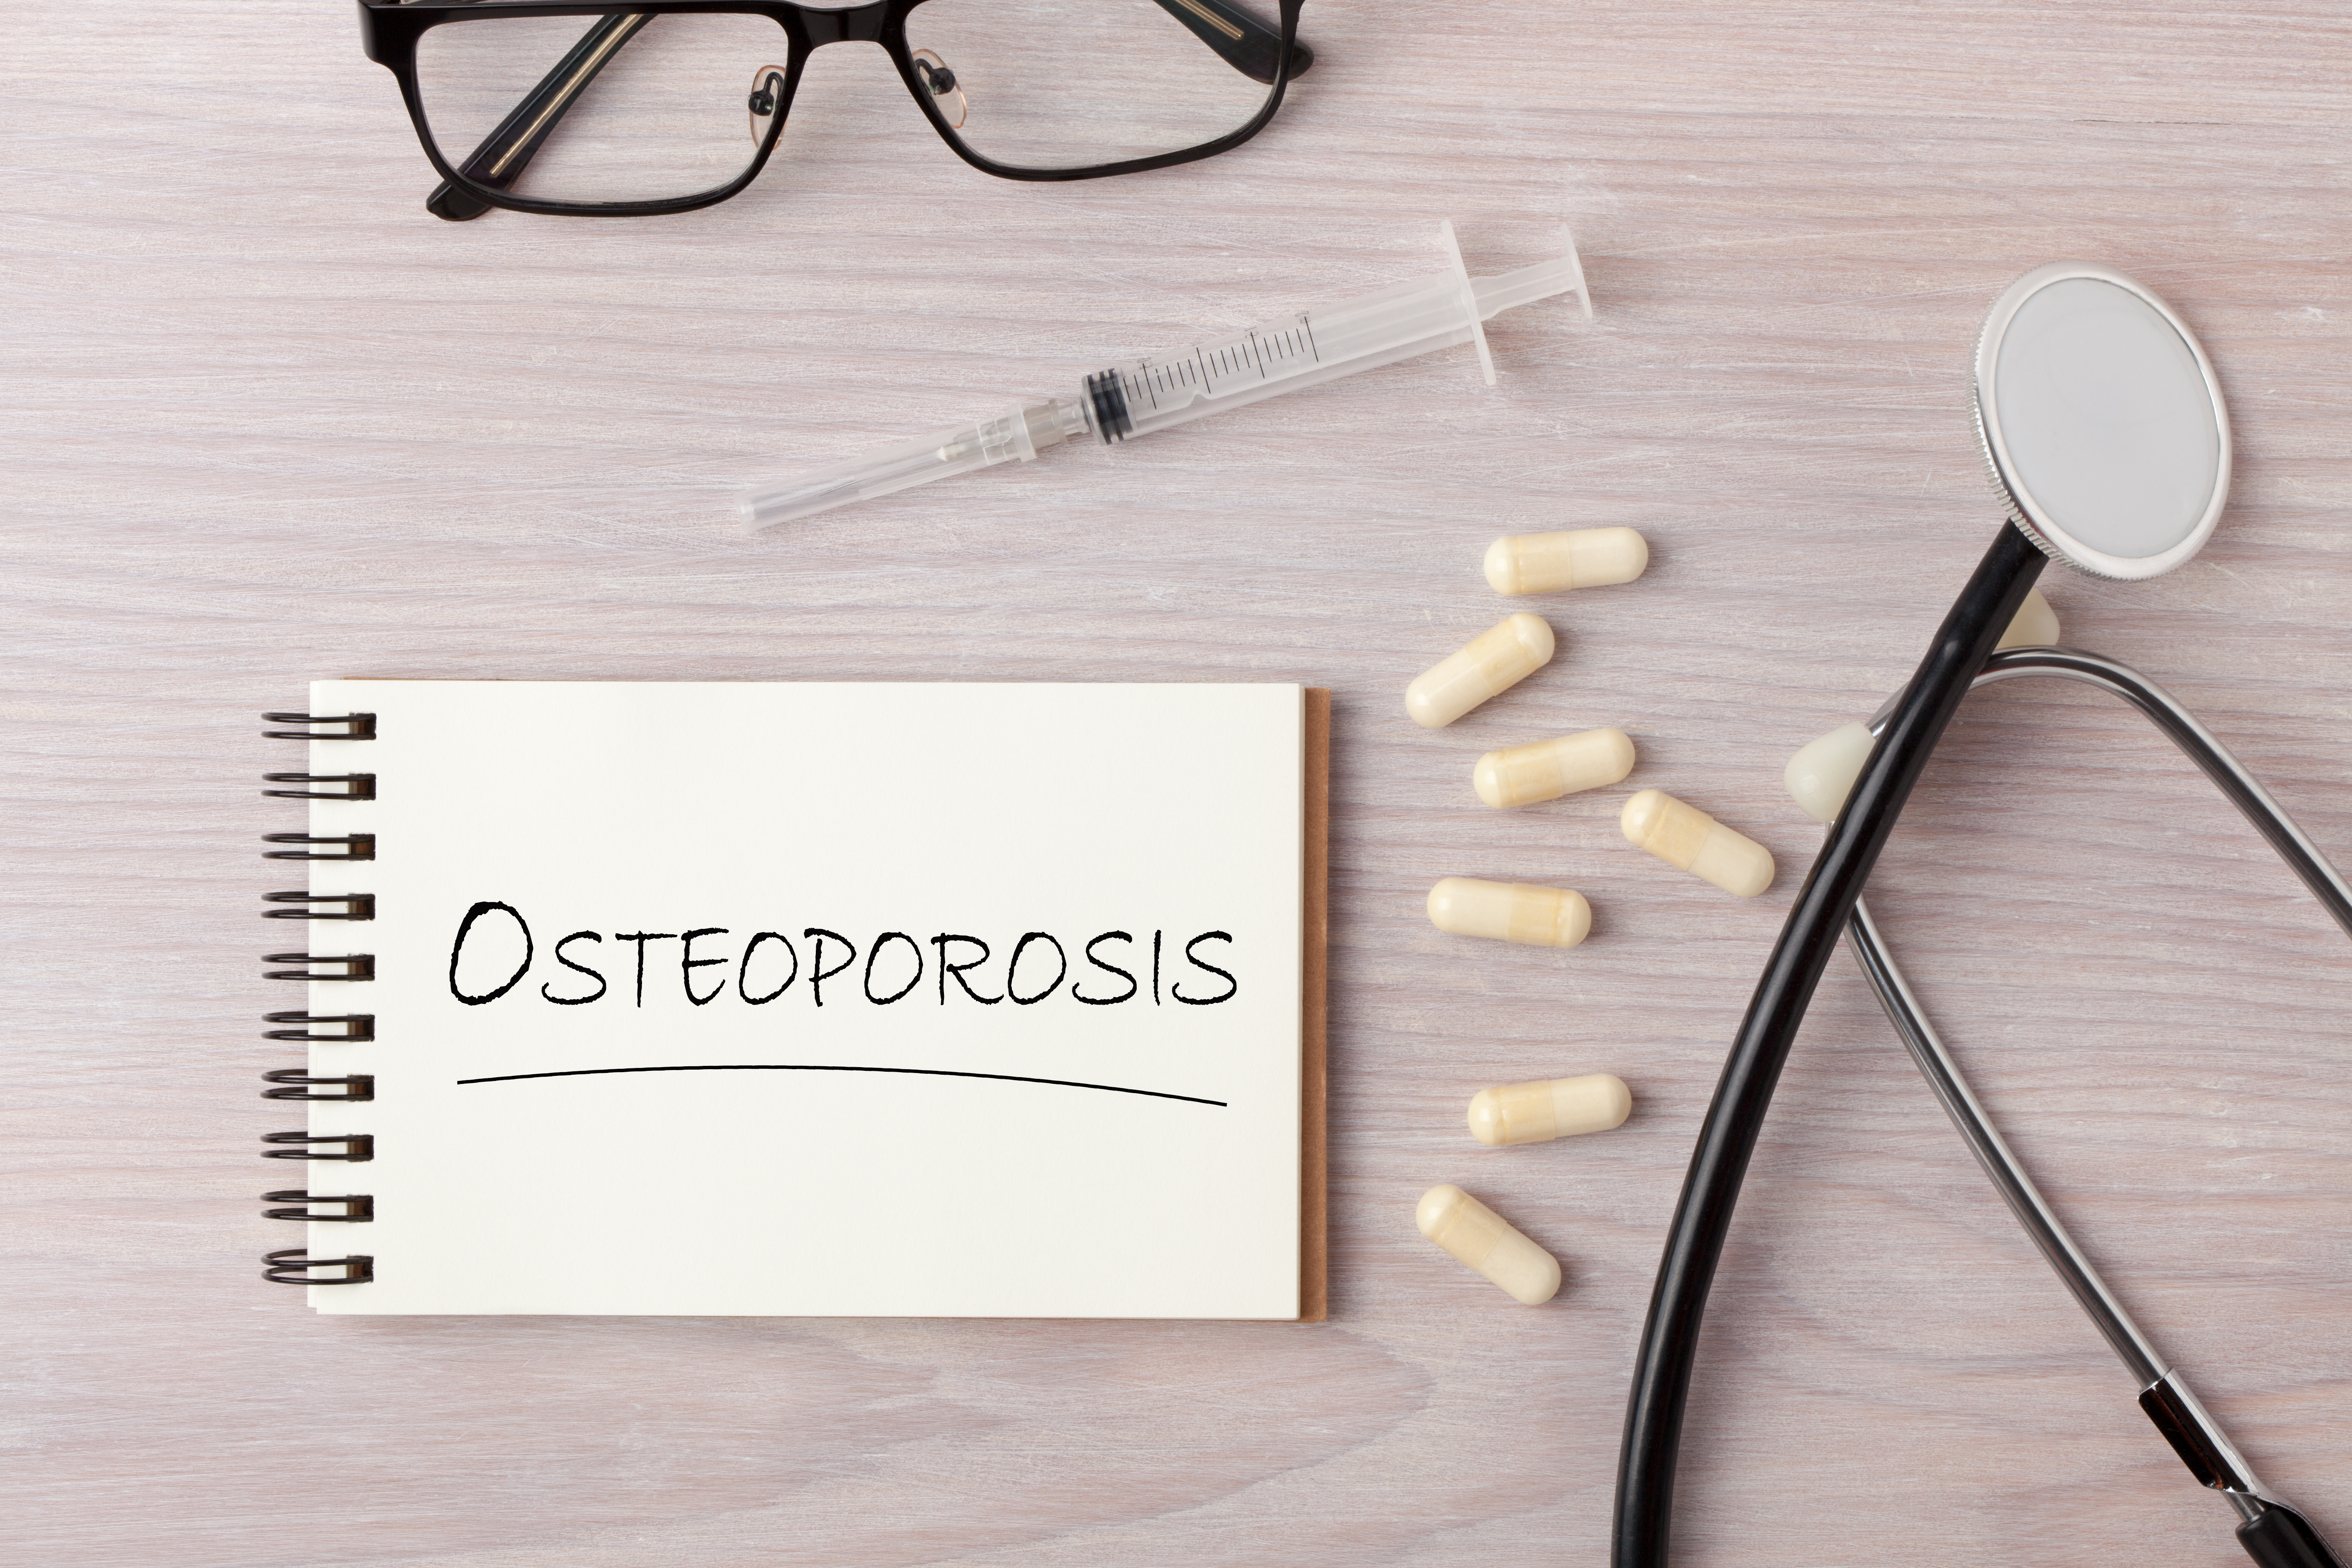 Osteoporosis written on a pad with medications and stethoscope nearby